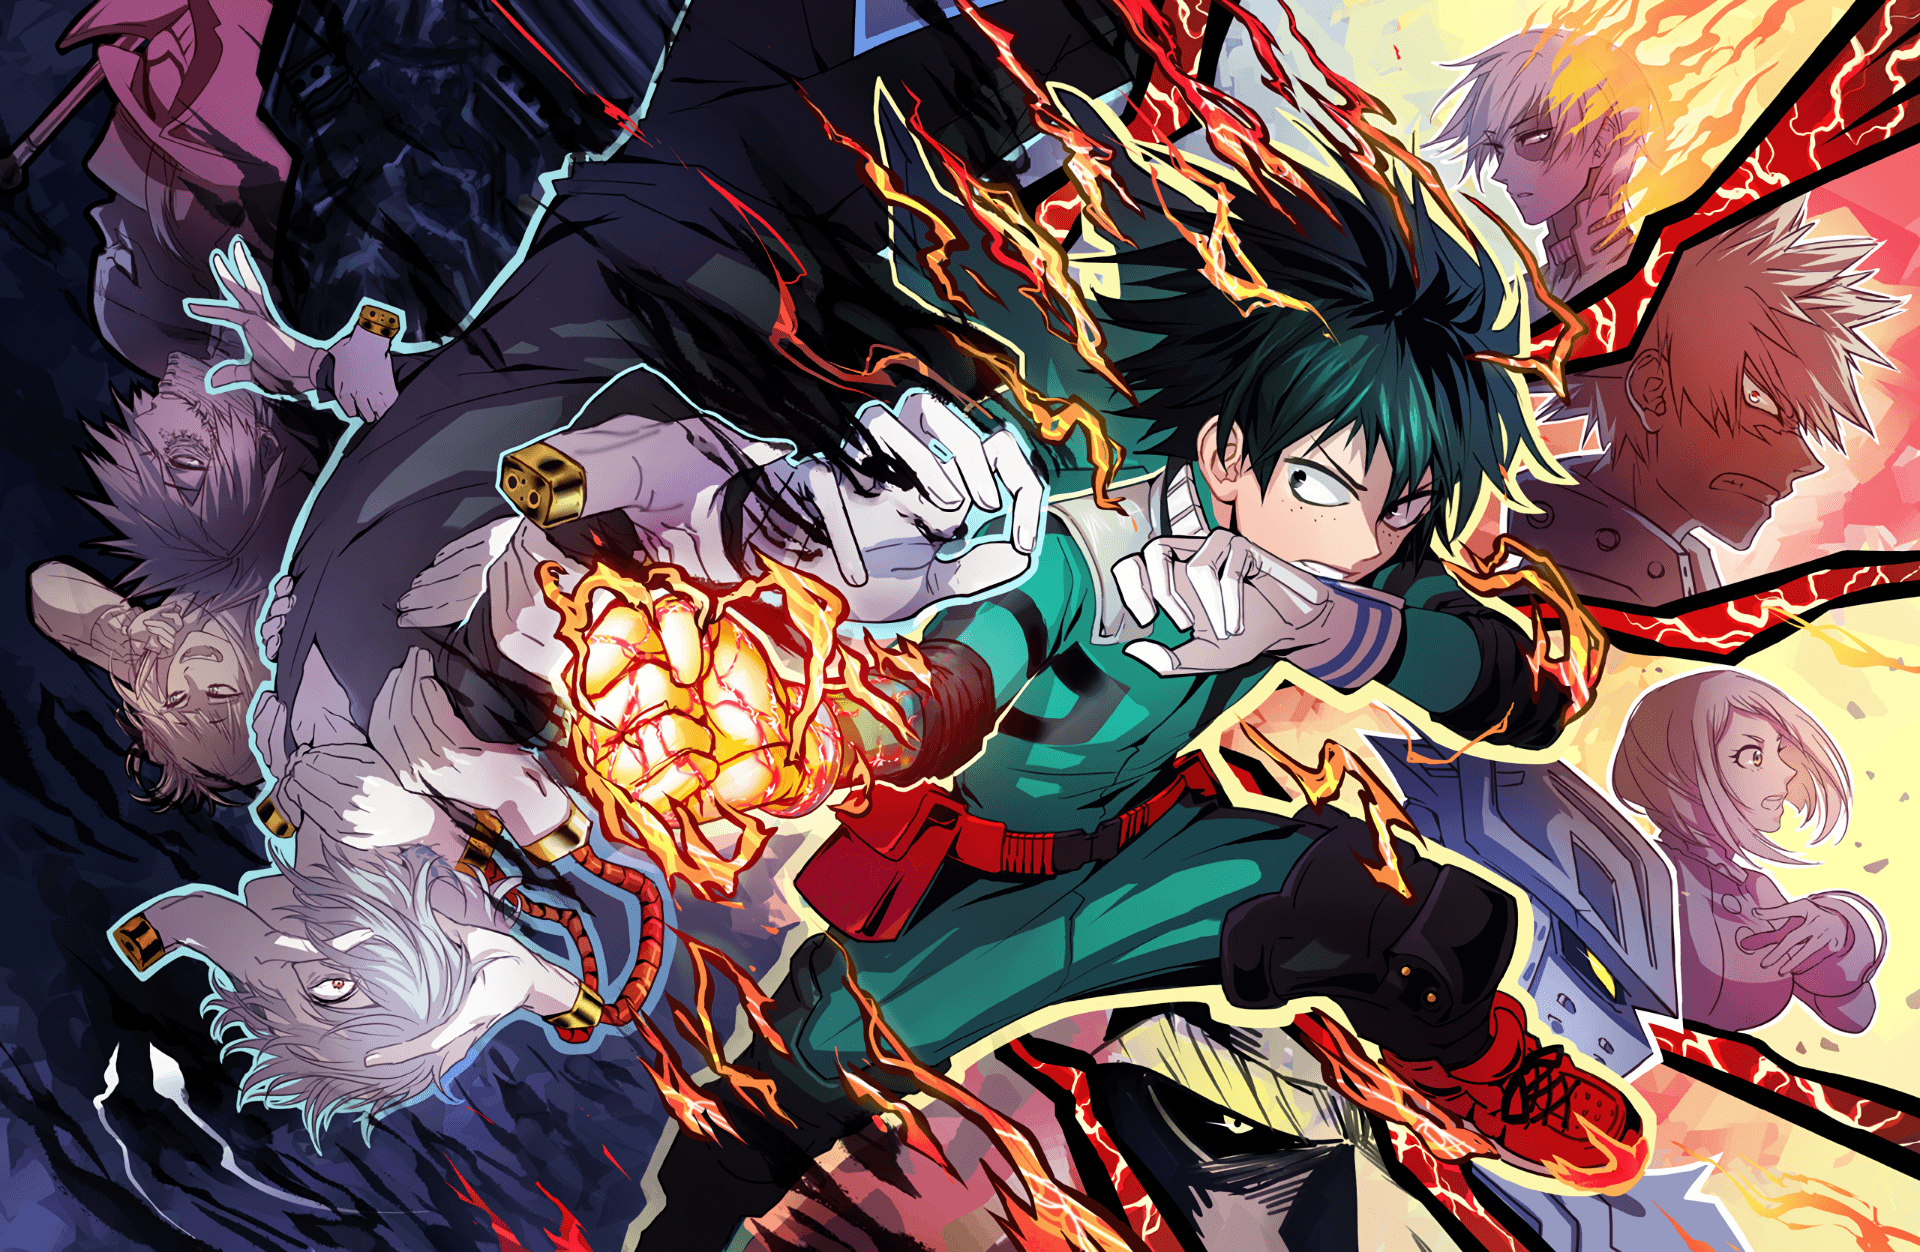 65+ My Hero Academia 4K Wallpapers: HD, 4K, 5K for PC and Mobile | Download  free images for iPhone, Android